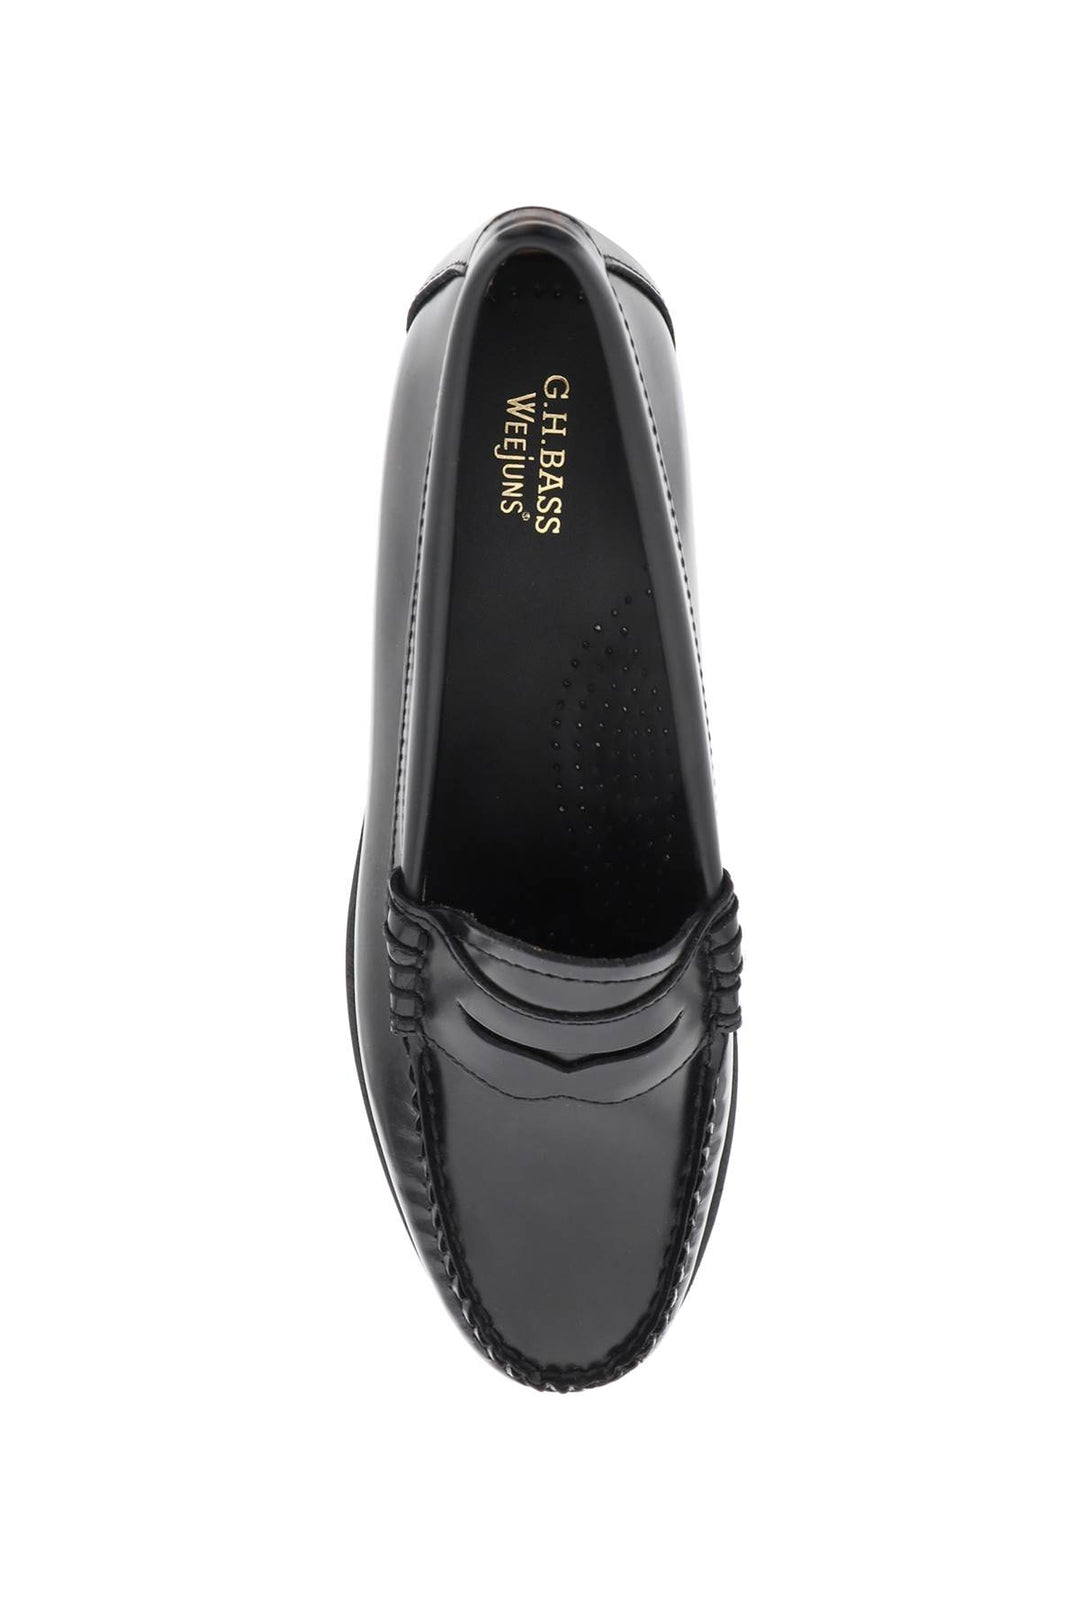 G.H. Bass Weejuns Penny Loafers   Black